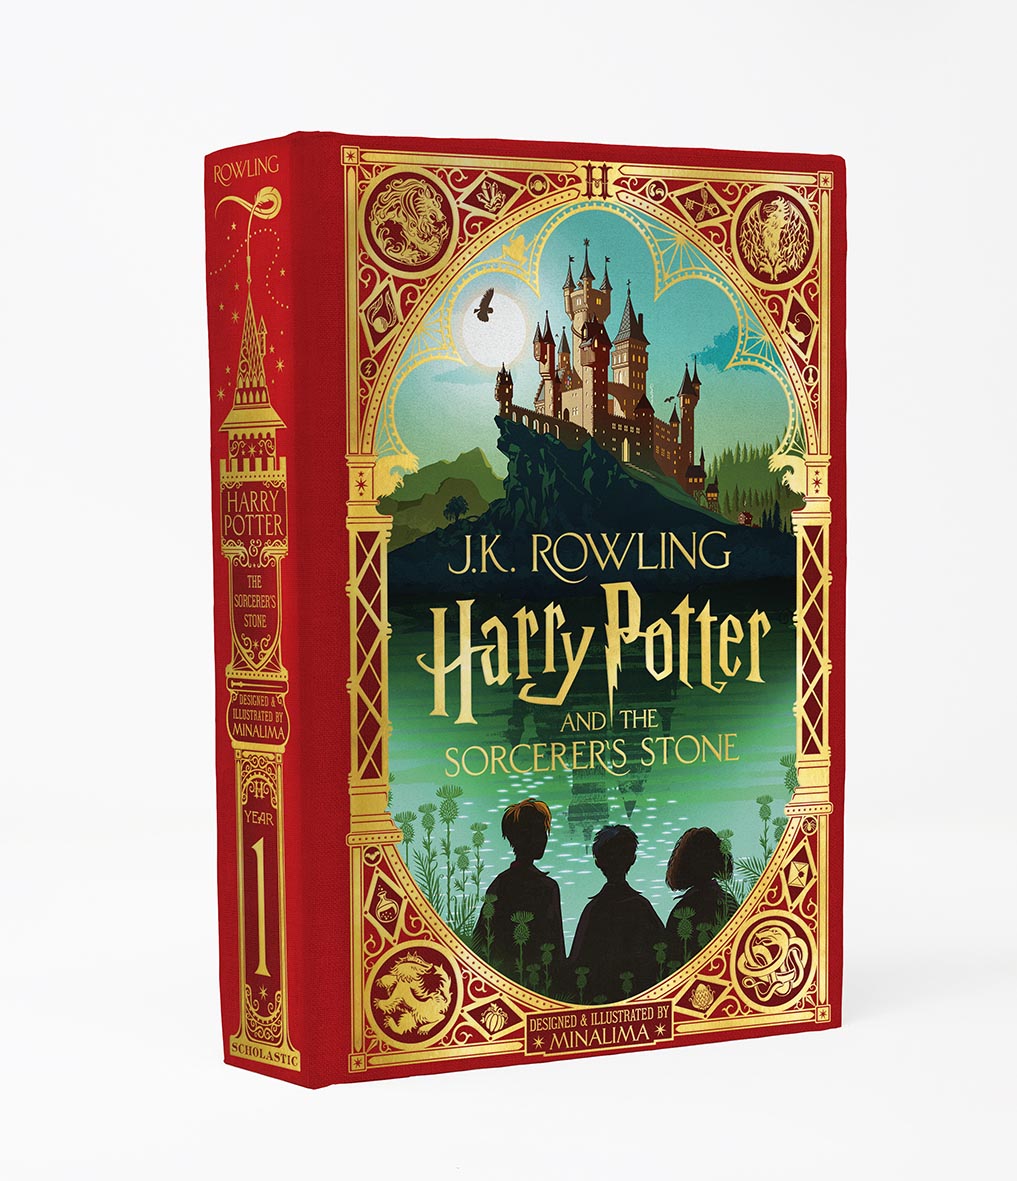 Scholastic and Insight Editions Preview Upcoming Harry Potter